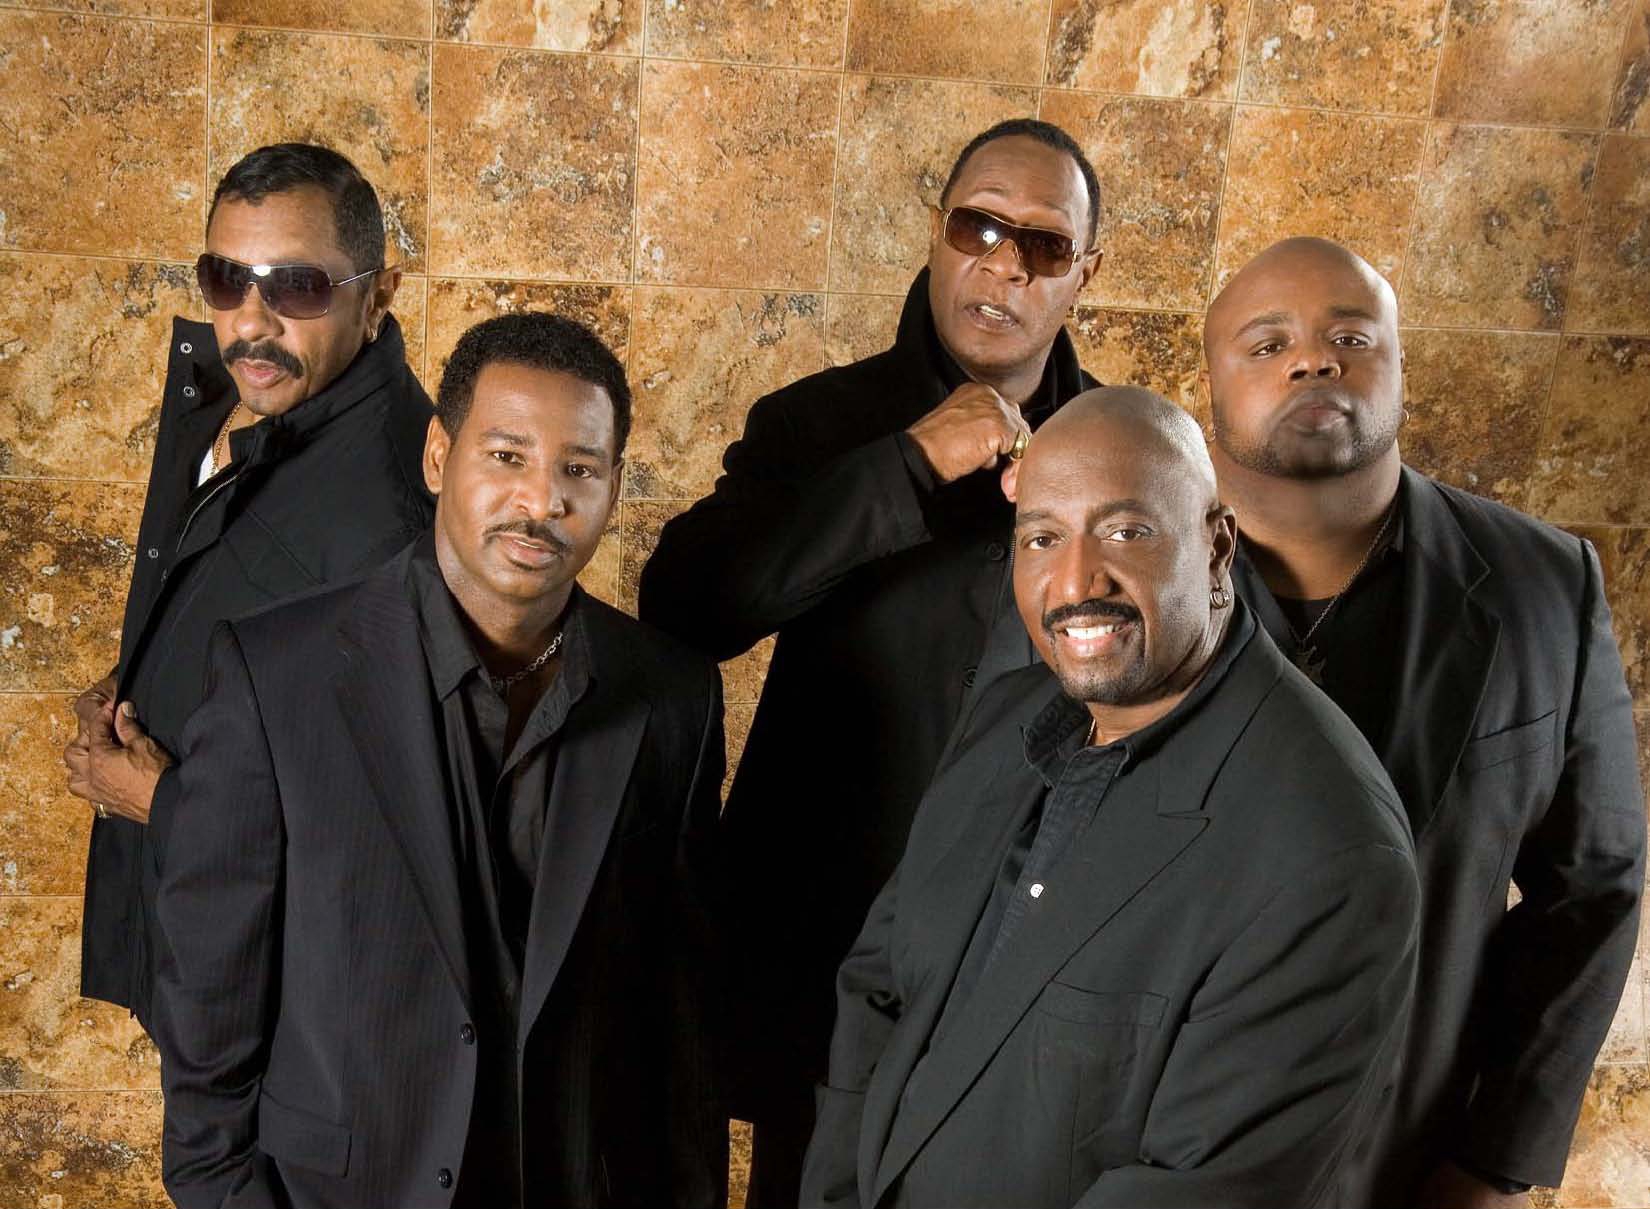 The Temptations will bring their nostalgic array of soul music to the Palladium on Feb. 27 for a live performance. (Submitted photo)